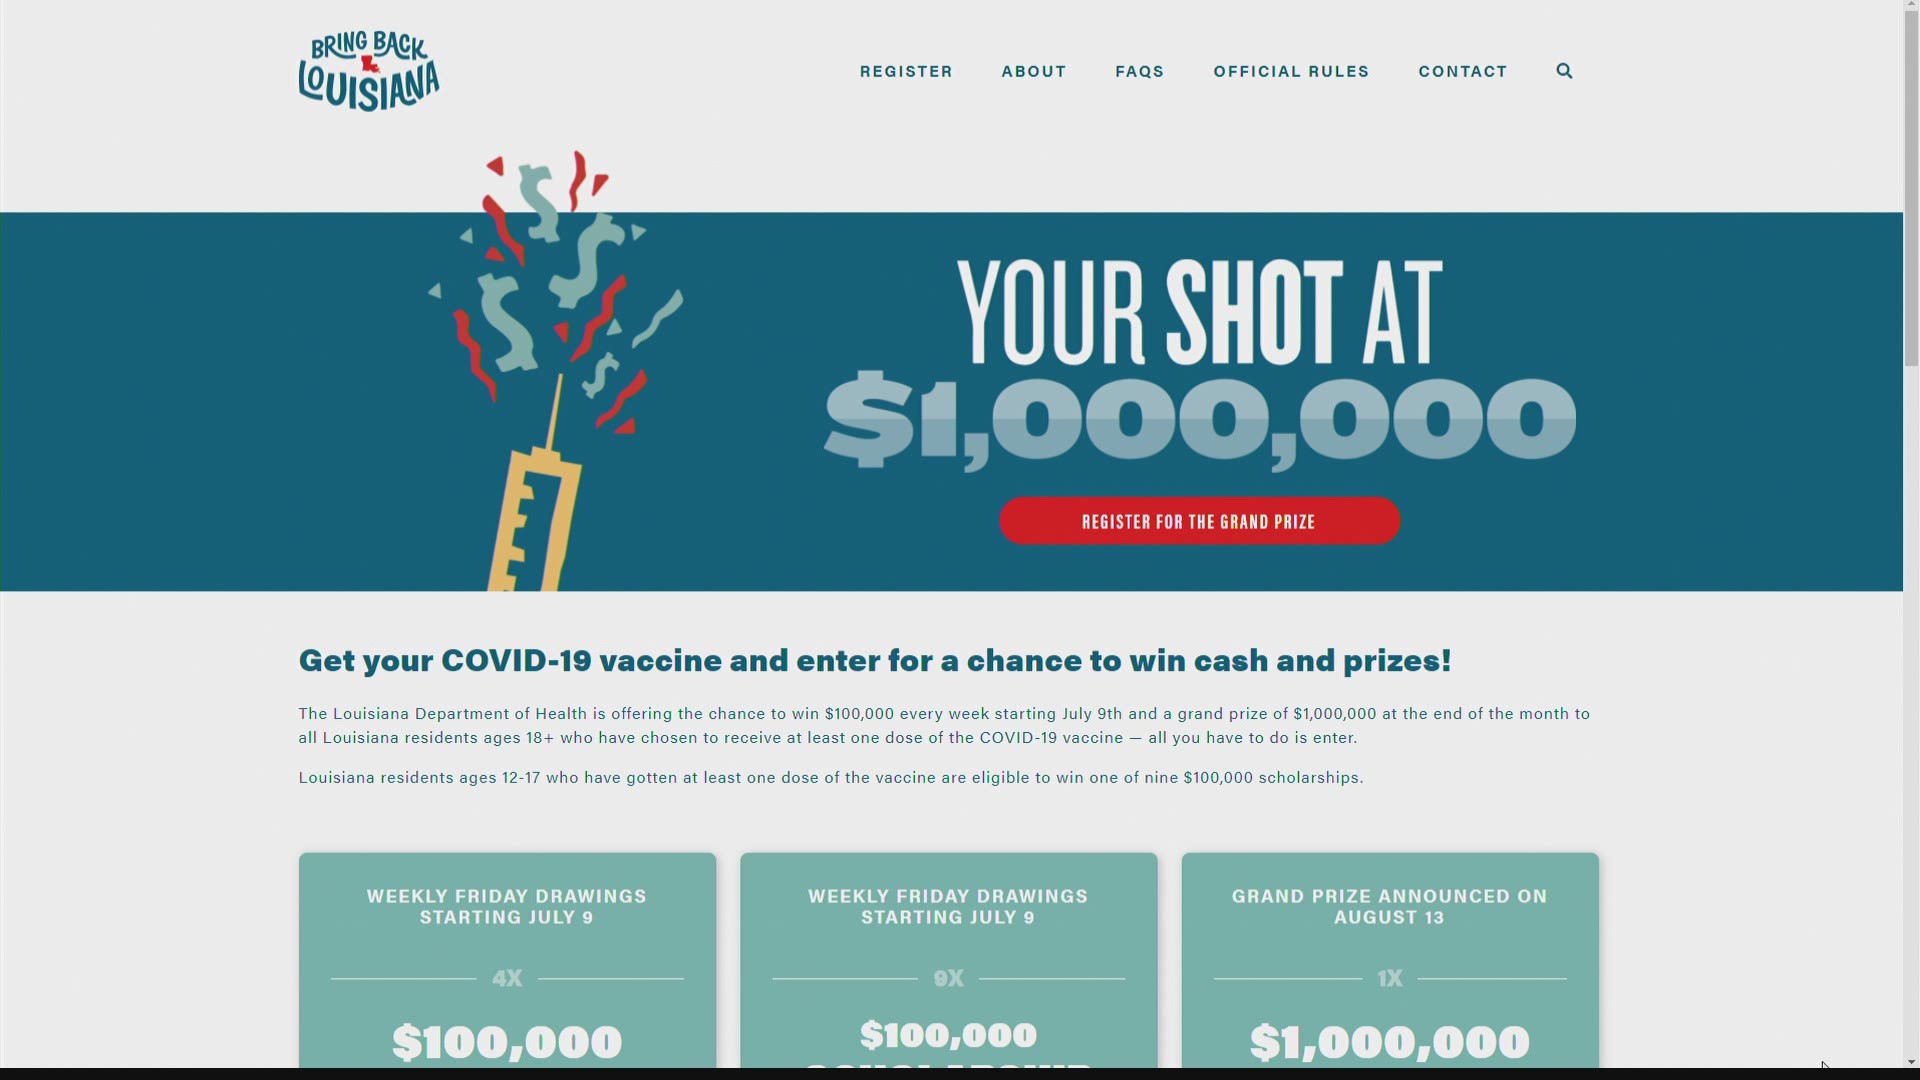 Better Business Bureau warns of COVID-19 vaccine lottery scams